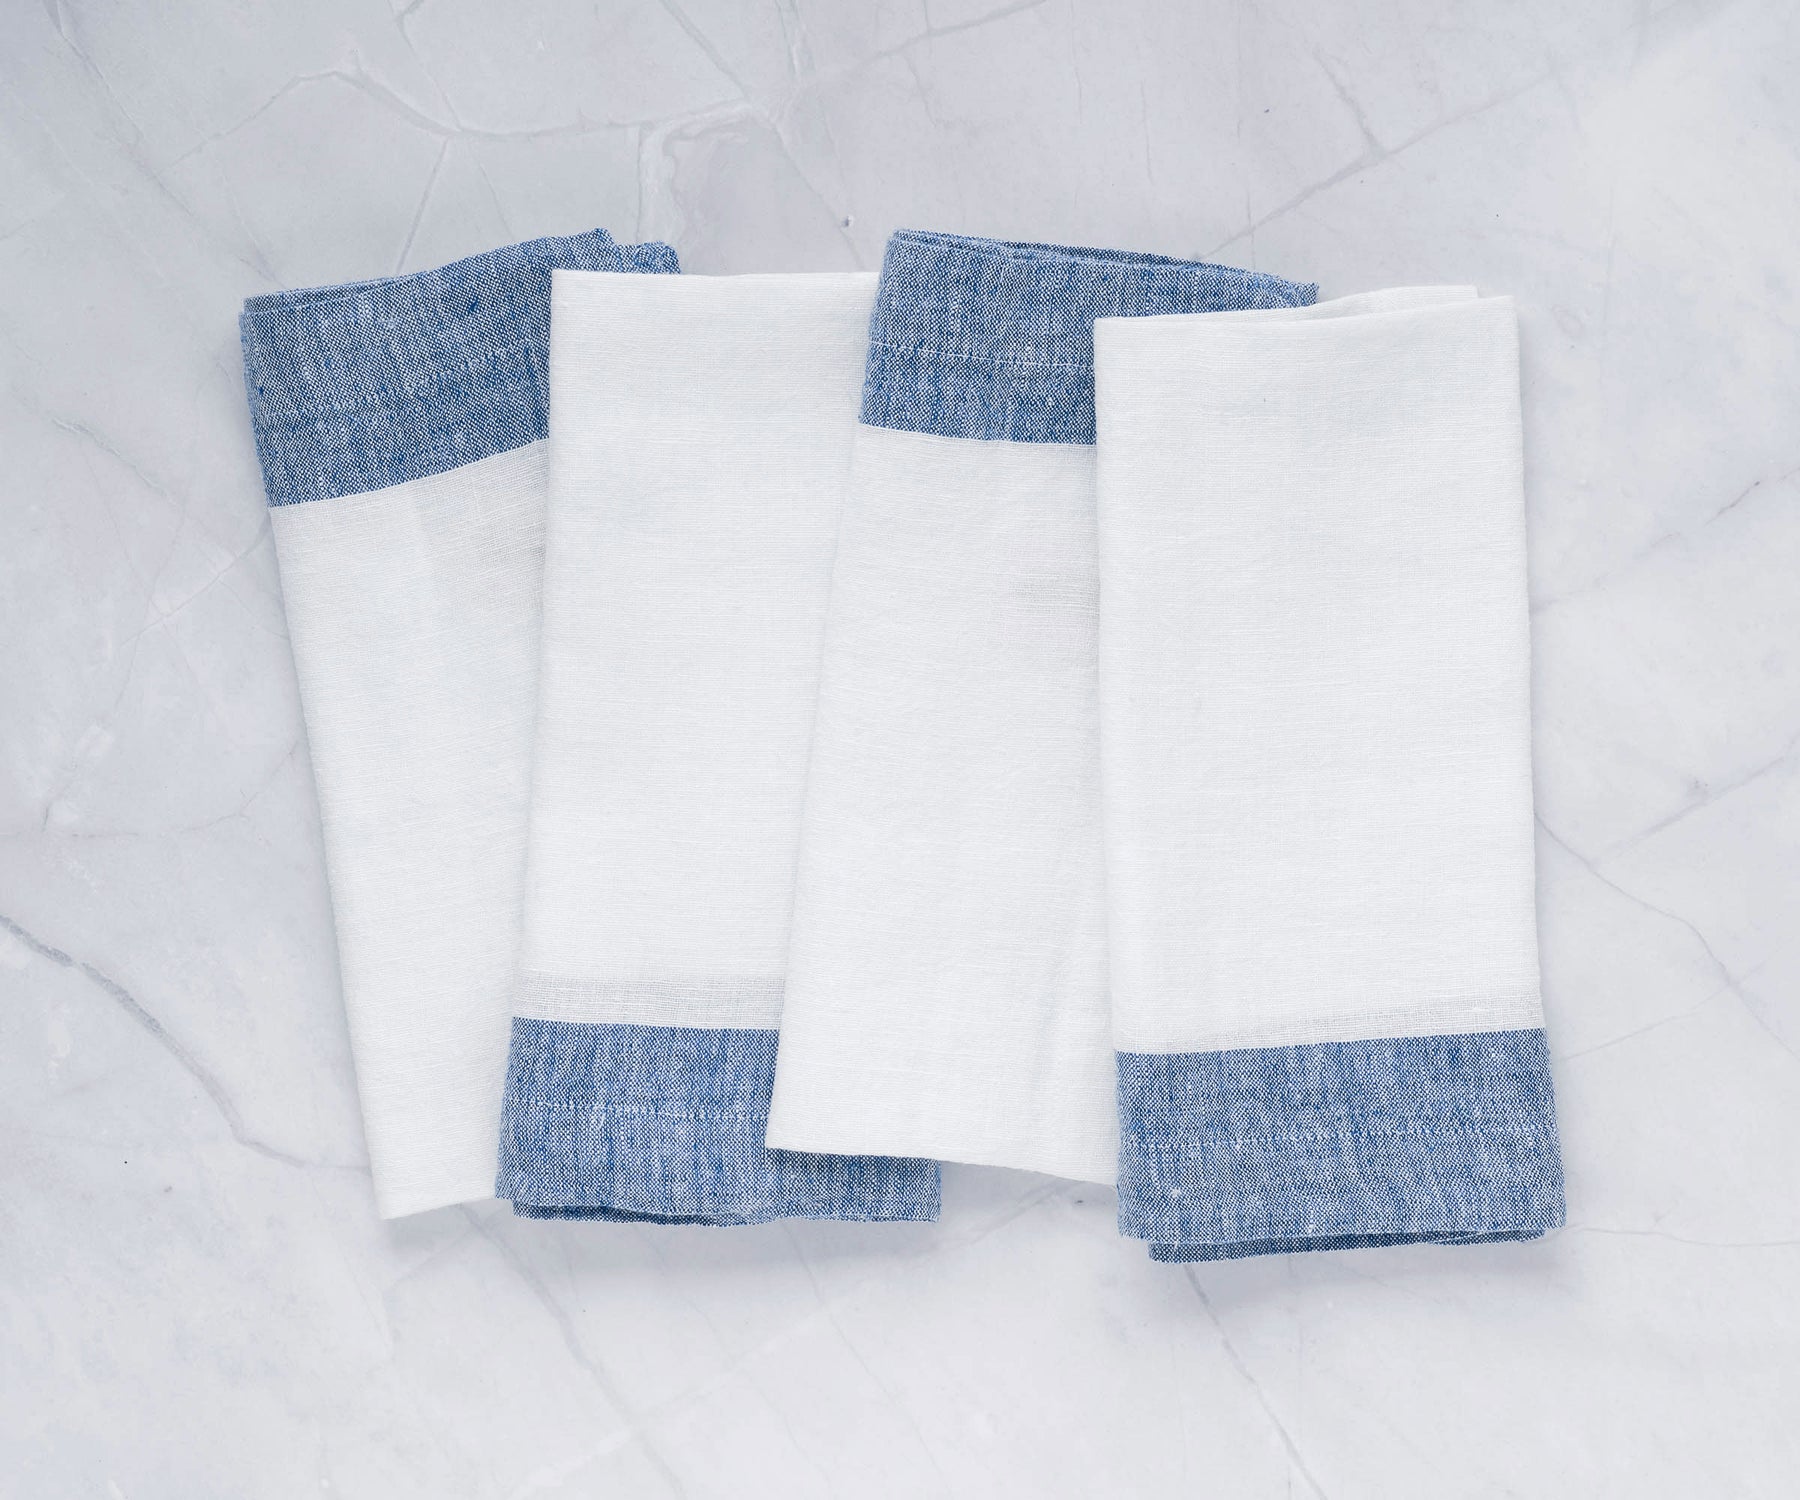 Enhance your cocktail parties with our cloth cocktail napkins. Add a touch of nature to your table with our green cloth napkins. Create a cool and calming ambiance with our blue cloth napkins. Stock up and save with our cloth napkins in bulk.